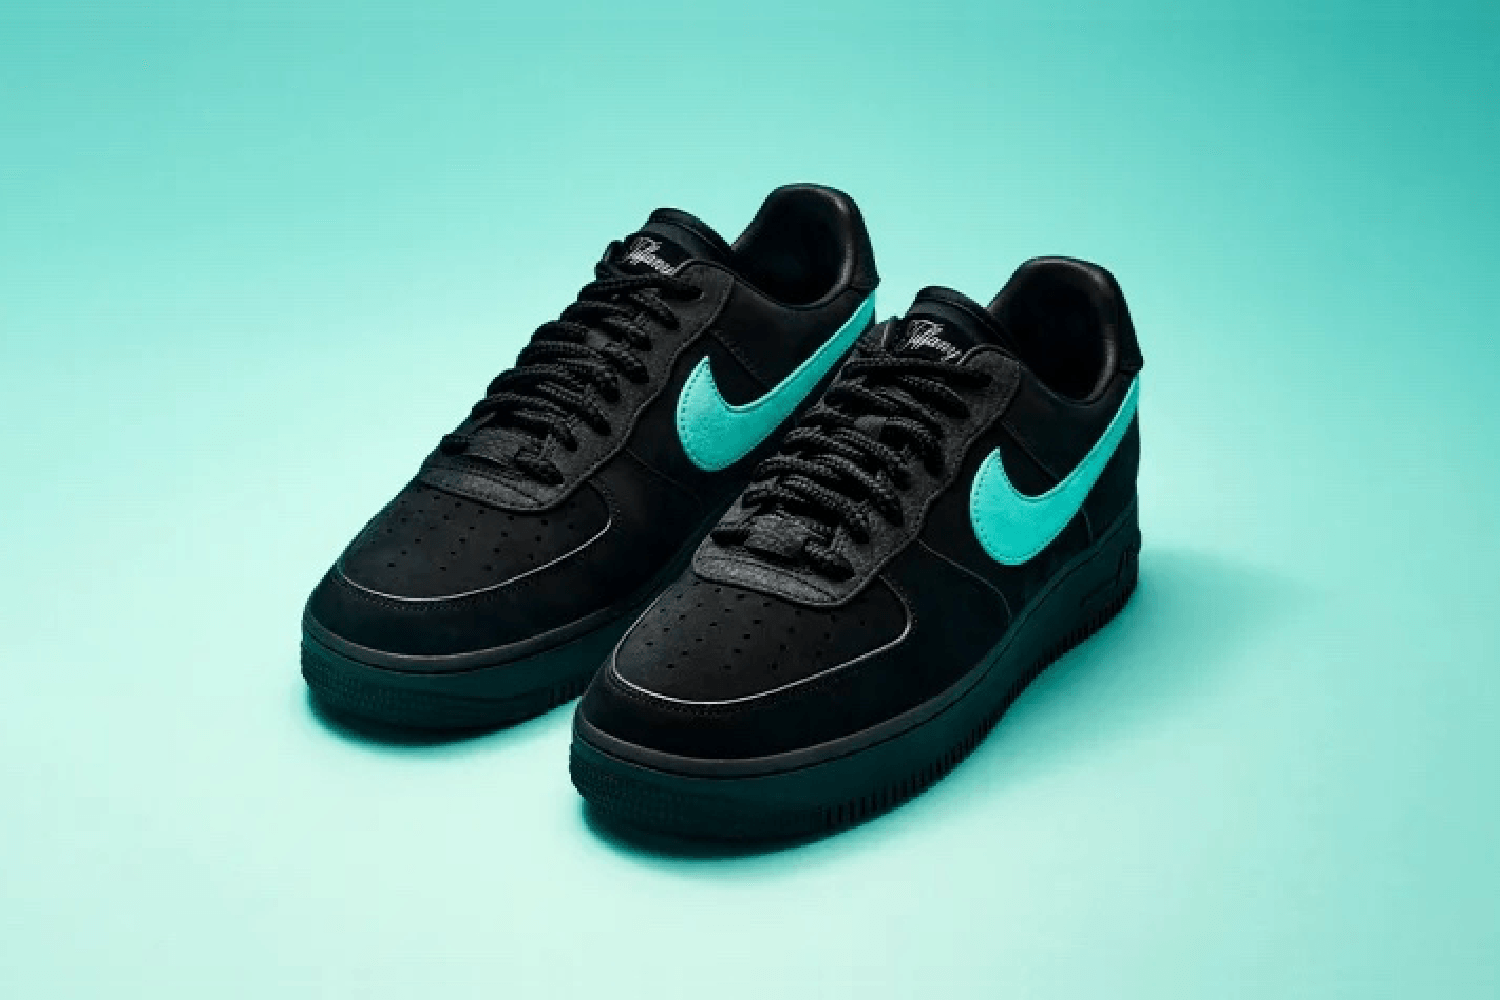 Nike x Tiffany: The history behind the collab